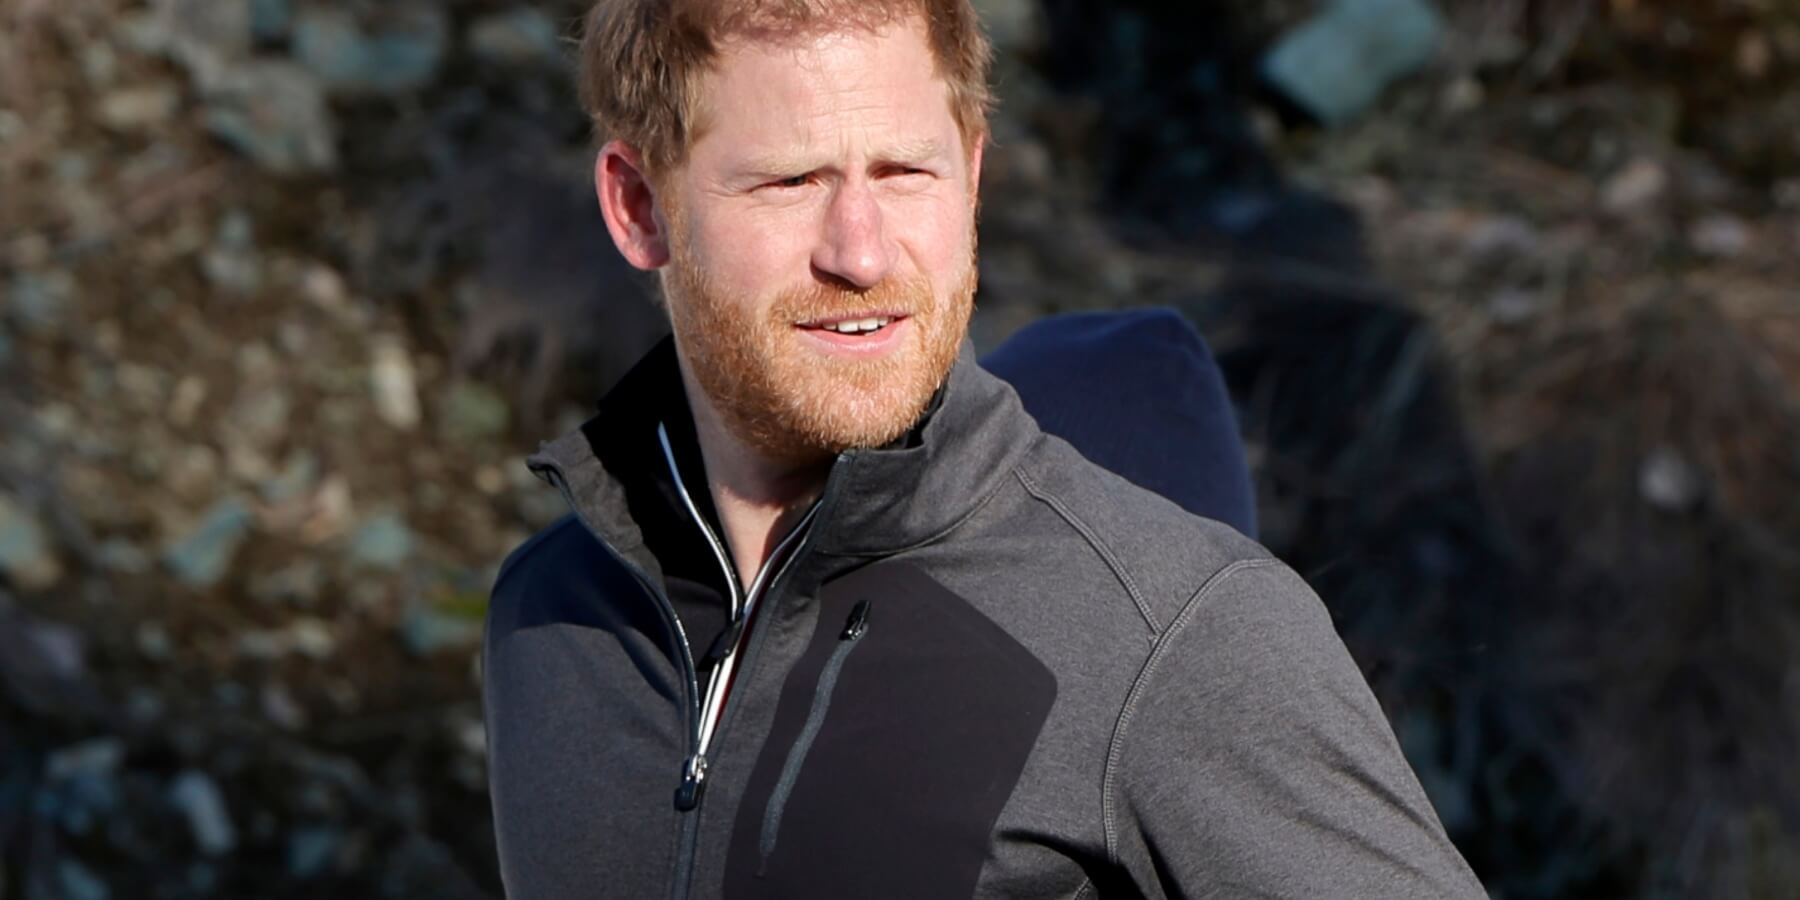 Prince Harry's road to redemption within the royal family may take longer than he'd like